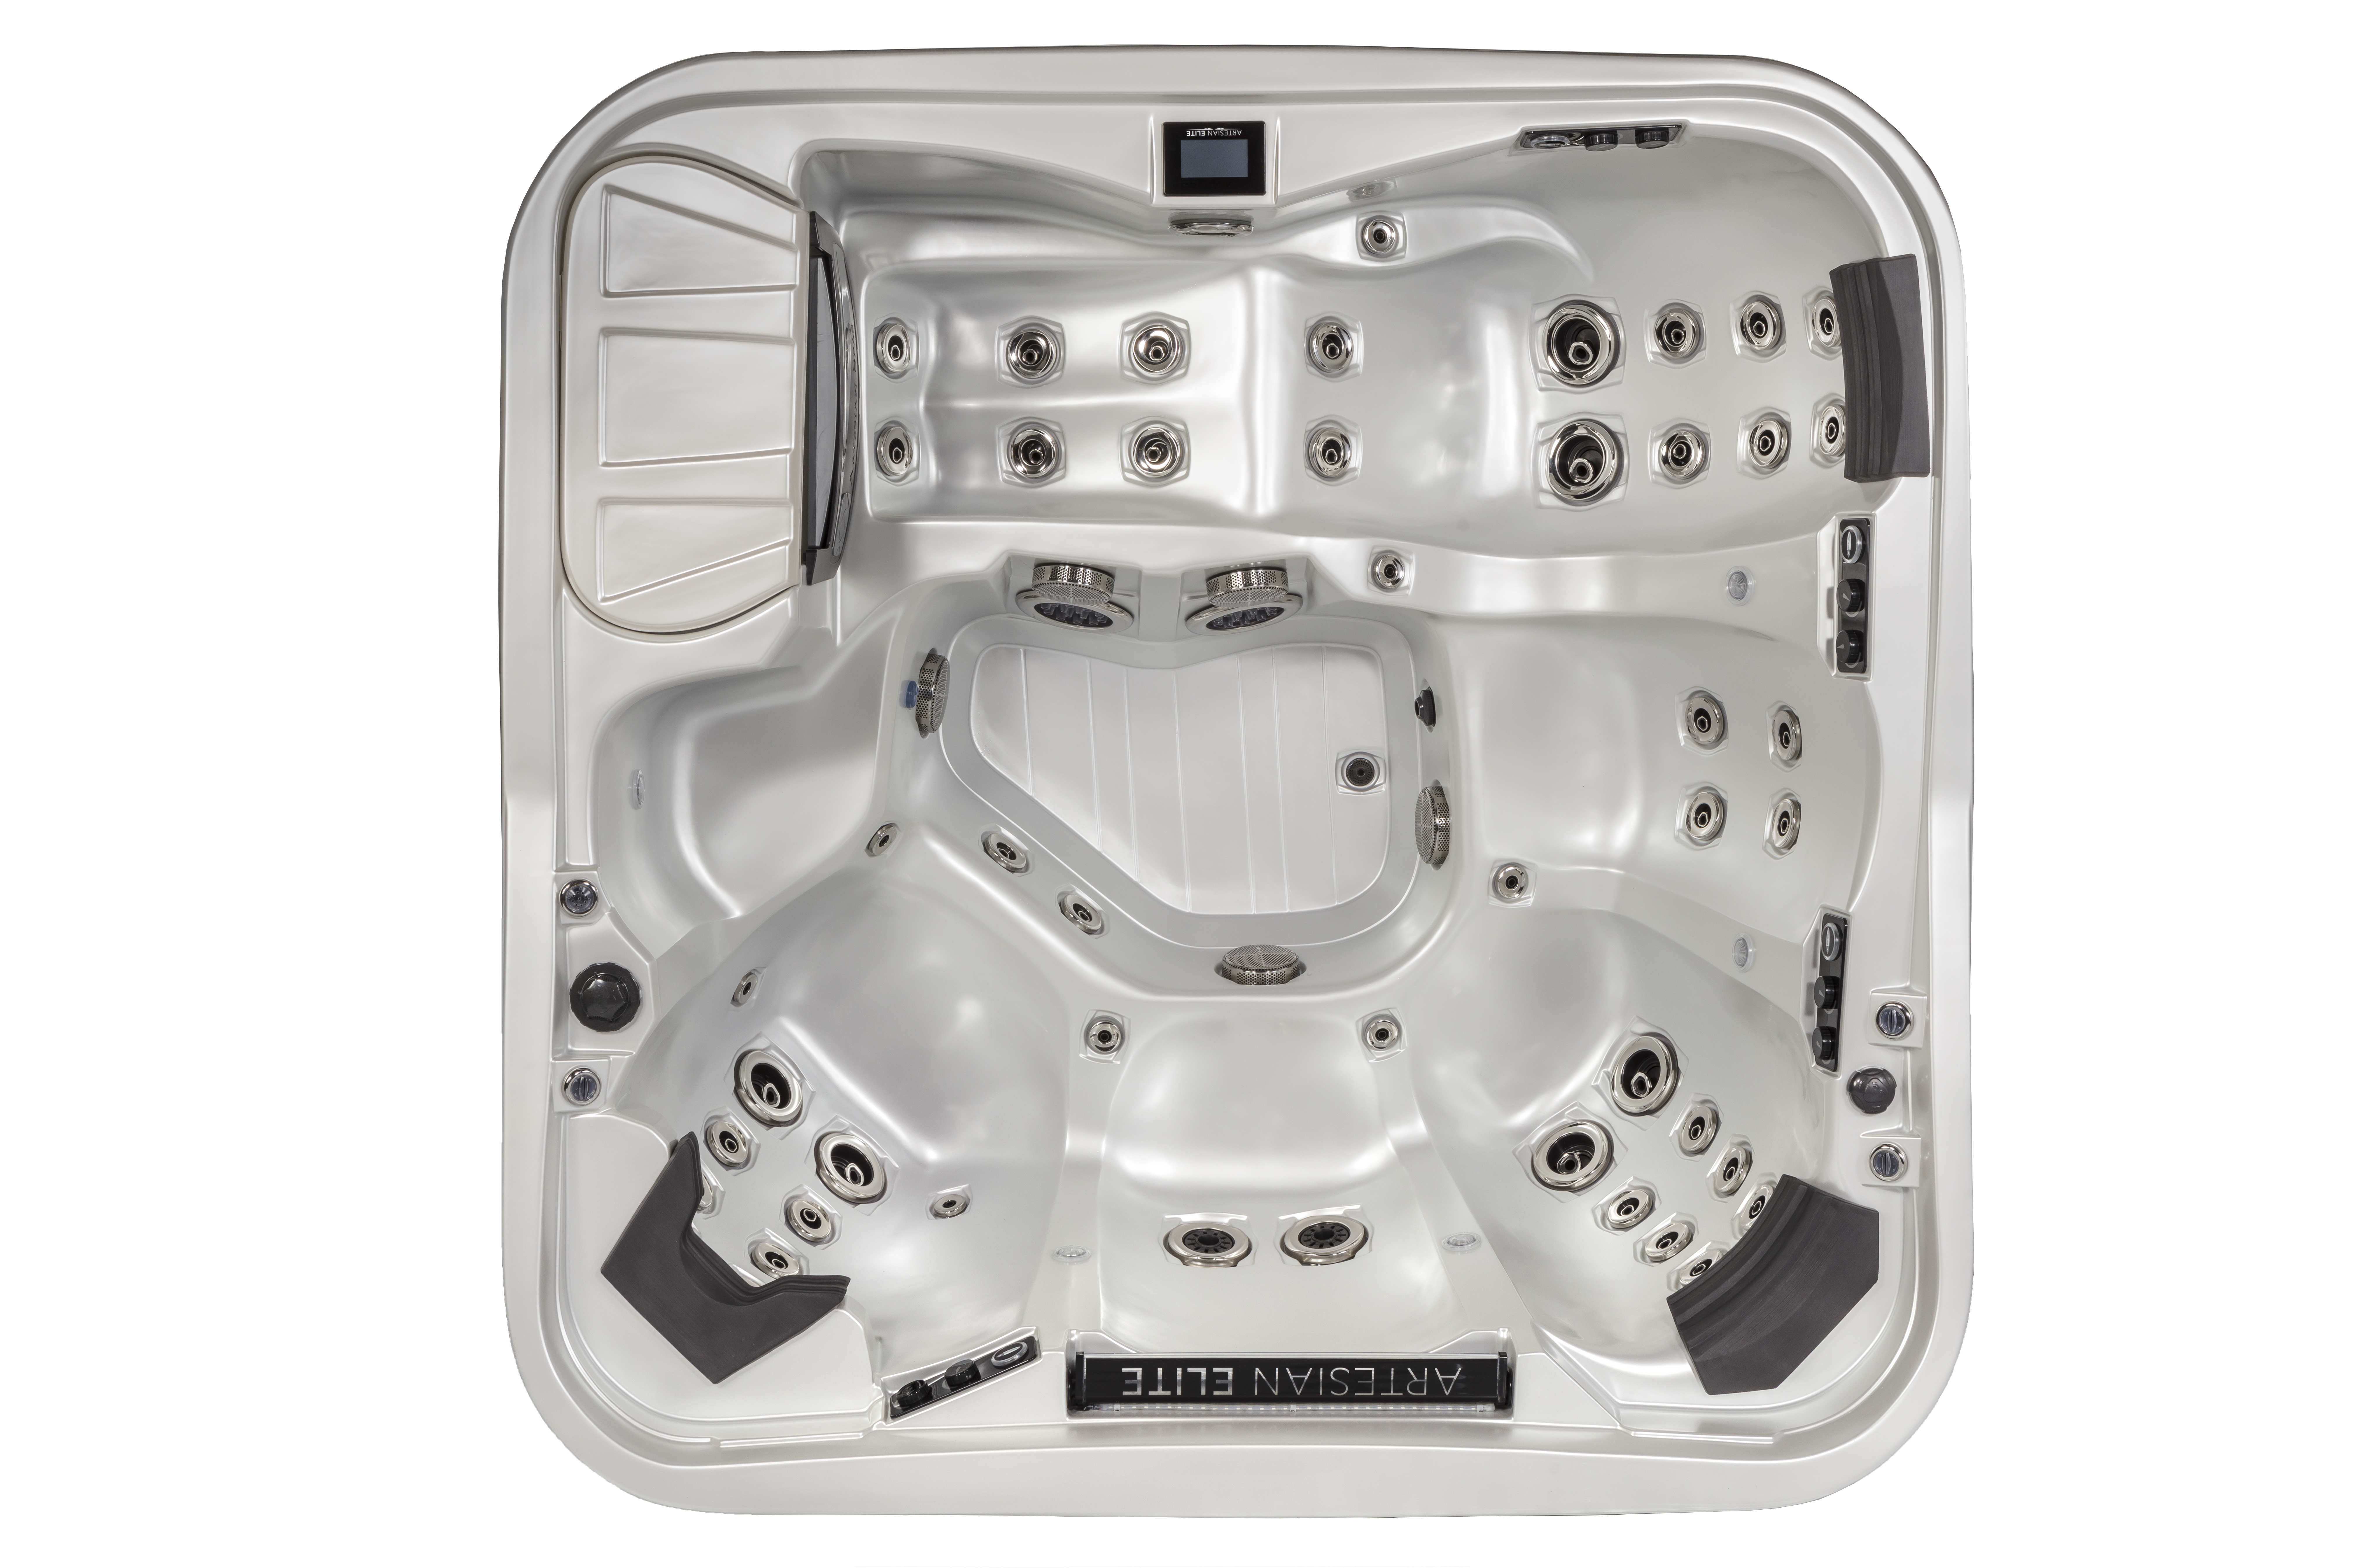 Eagle Crest hot tub with 6 seats and 55 jets